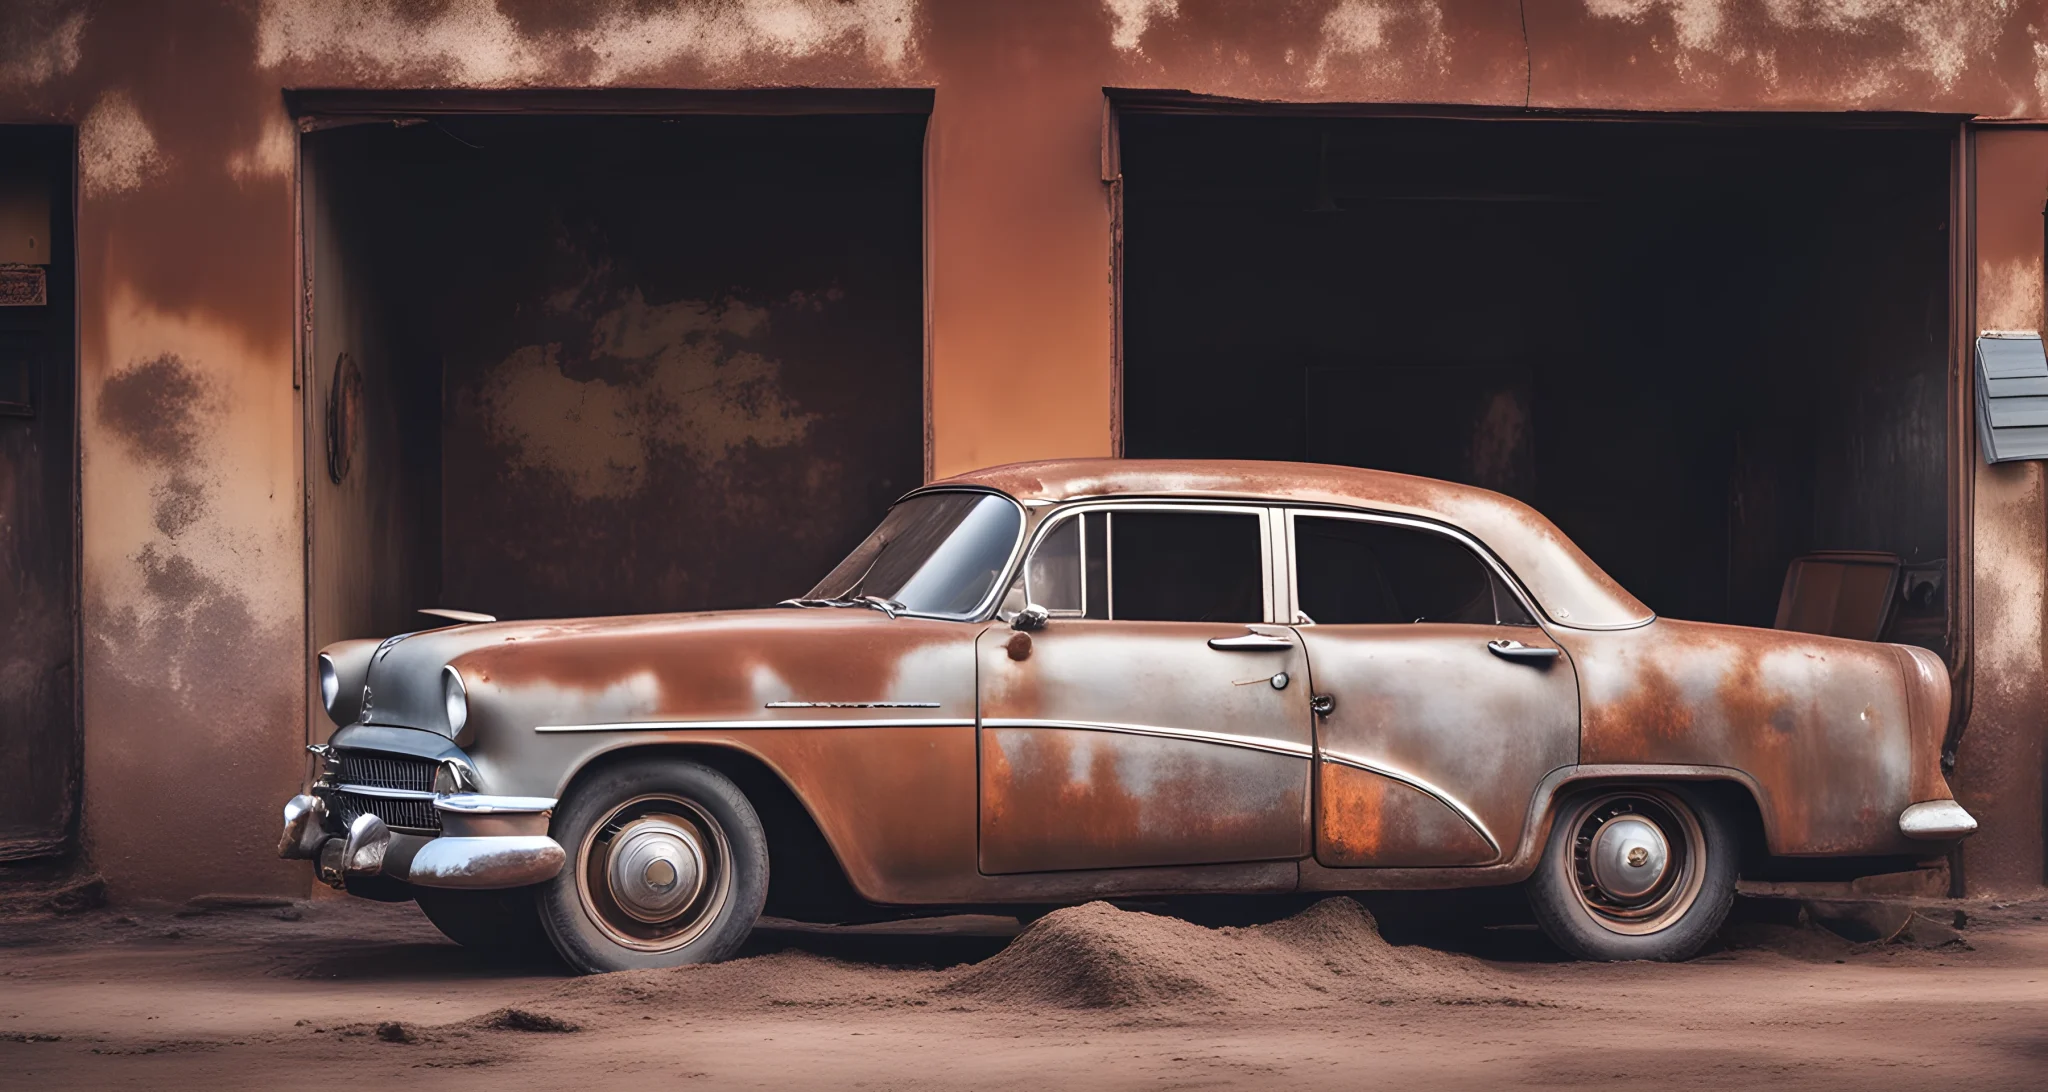 The image shows a vintage classic car covered in dust and rust, with the car's original logo and paint partially visible.